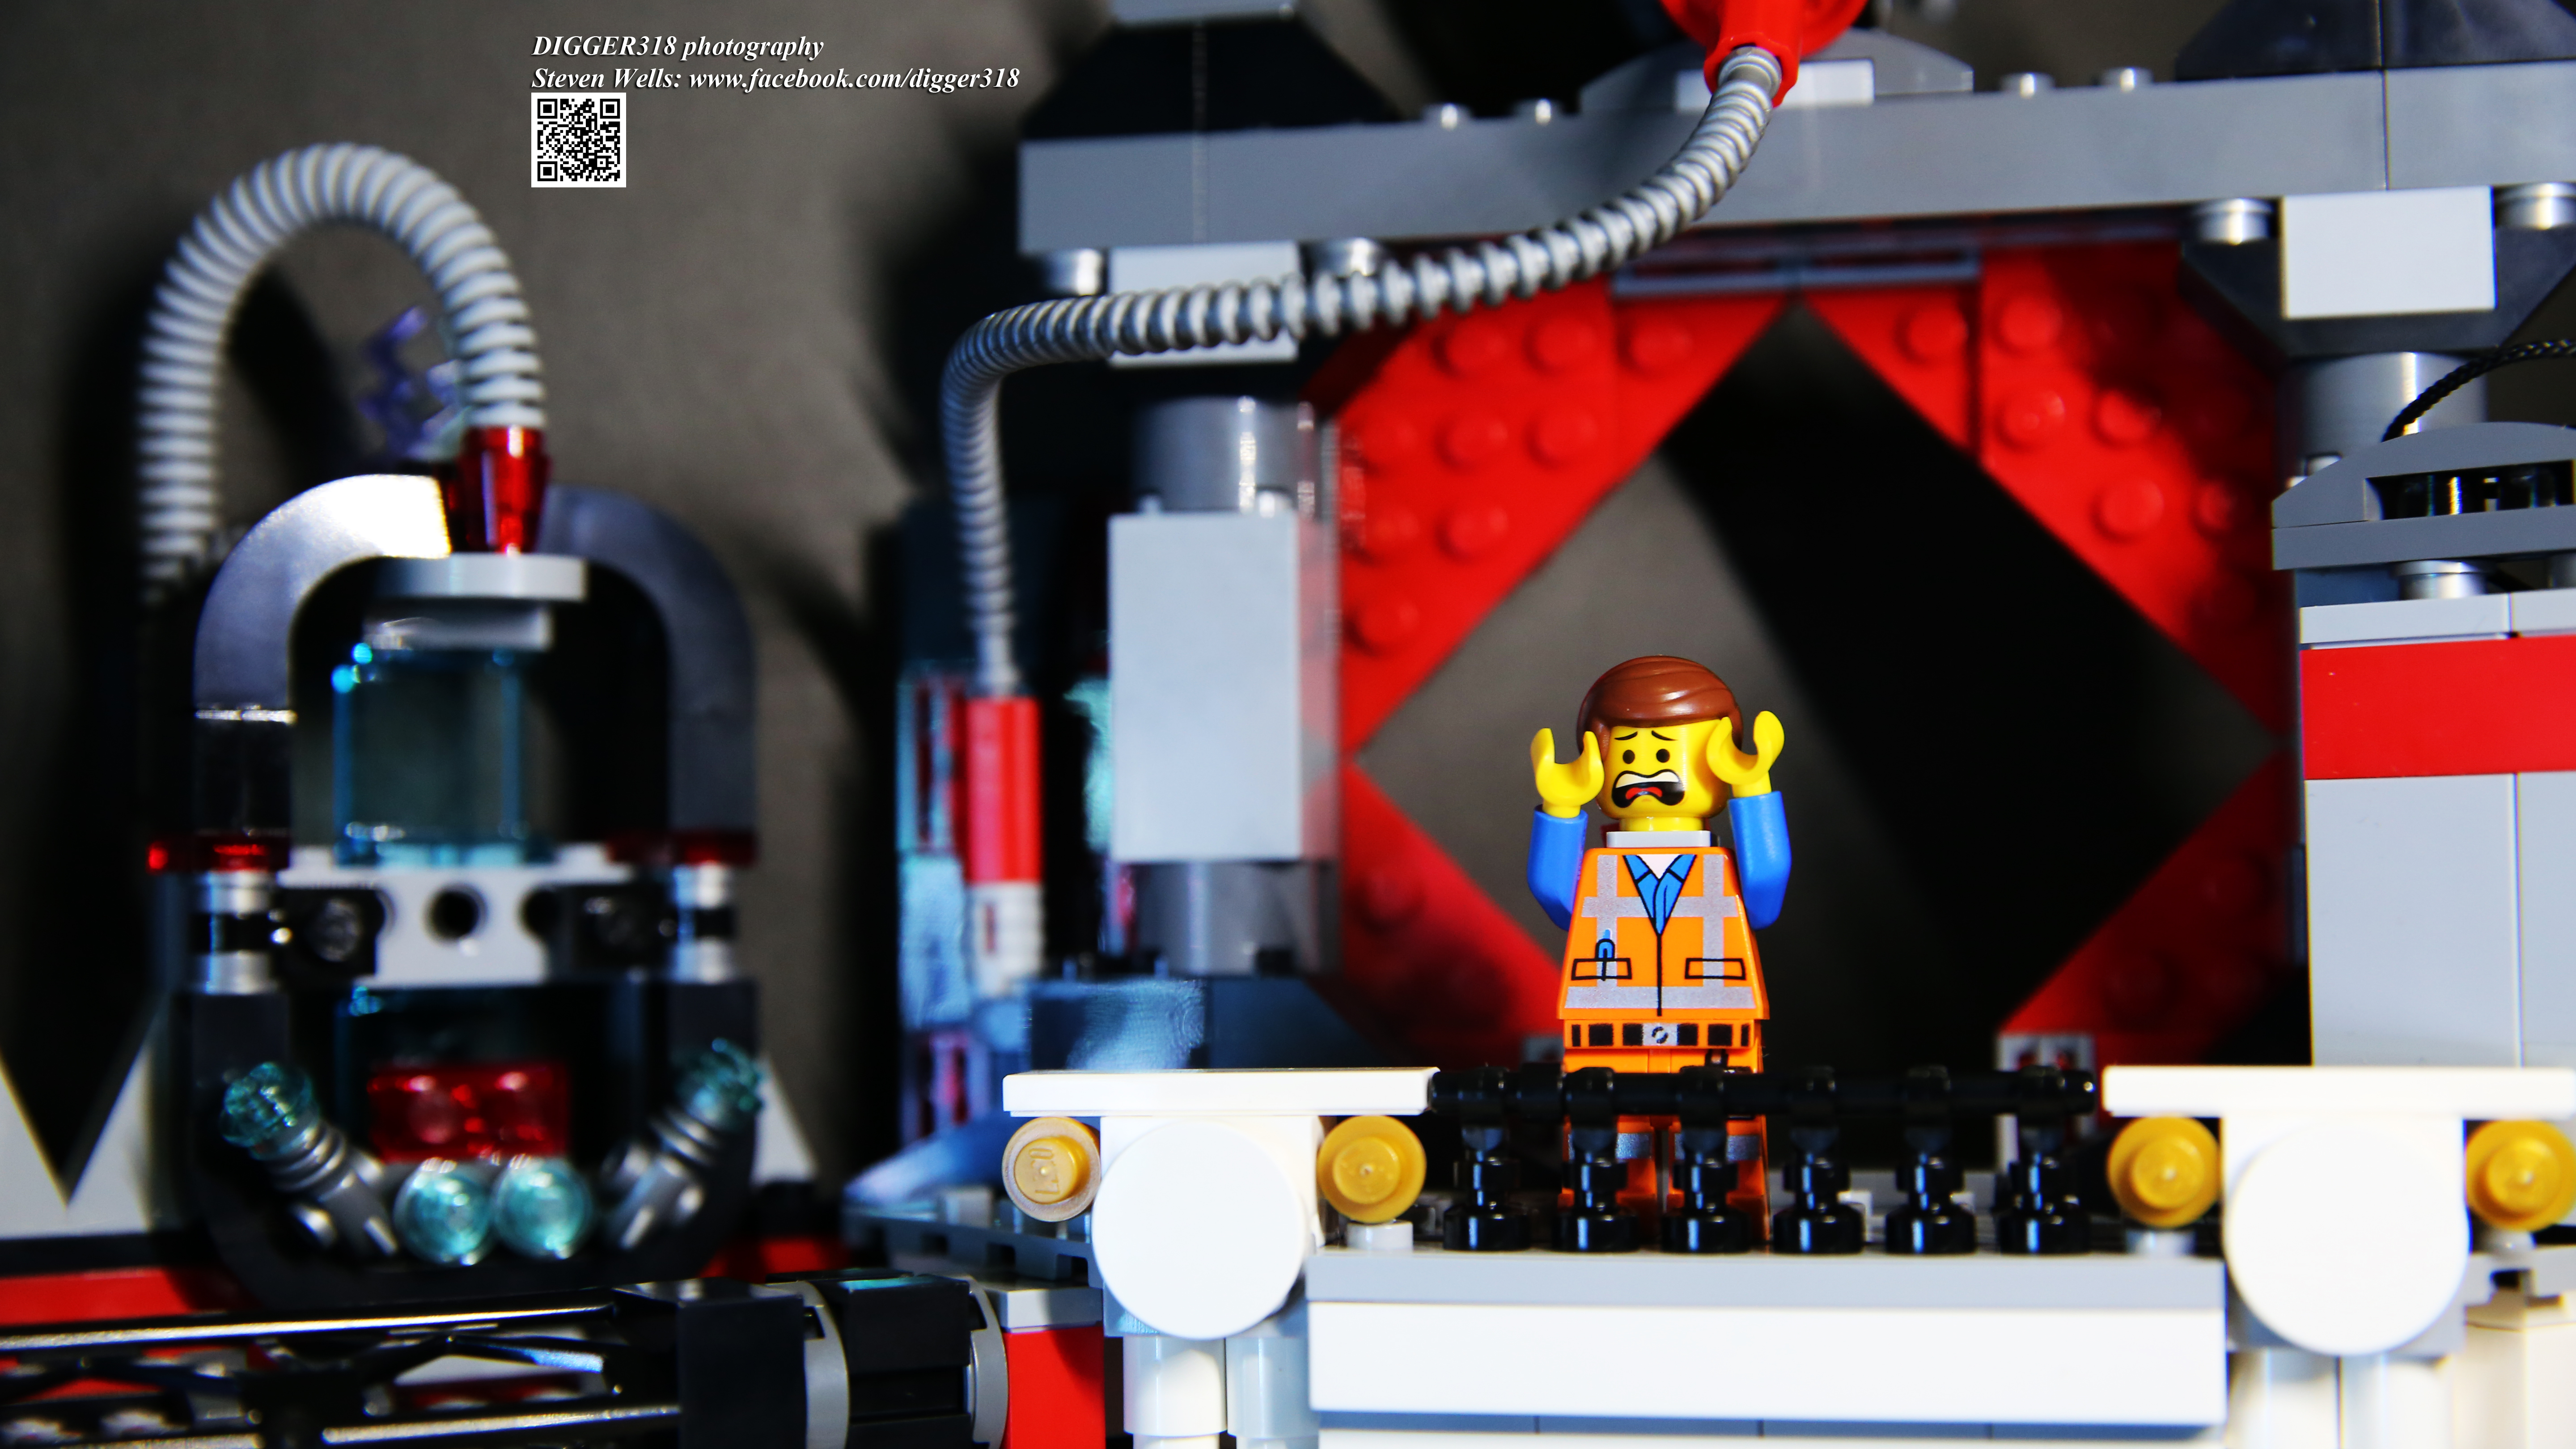 LEGO 70809 The Lego Movie Lord Business' Evil Lair by Digger318 on  DeviantArt